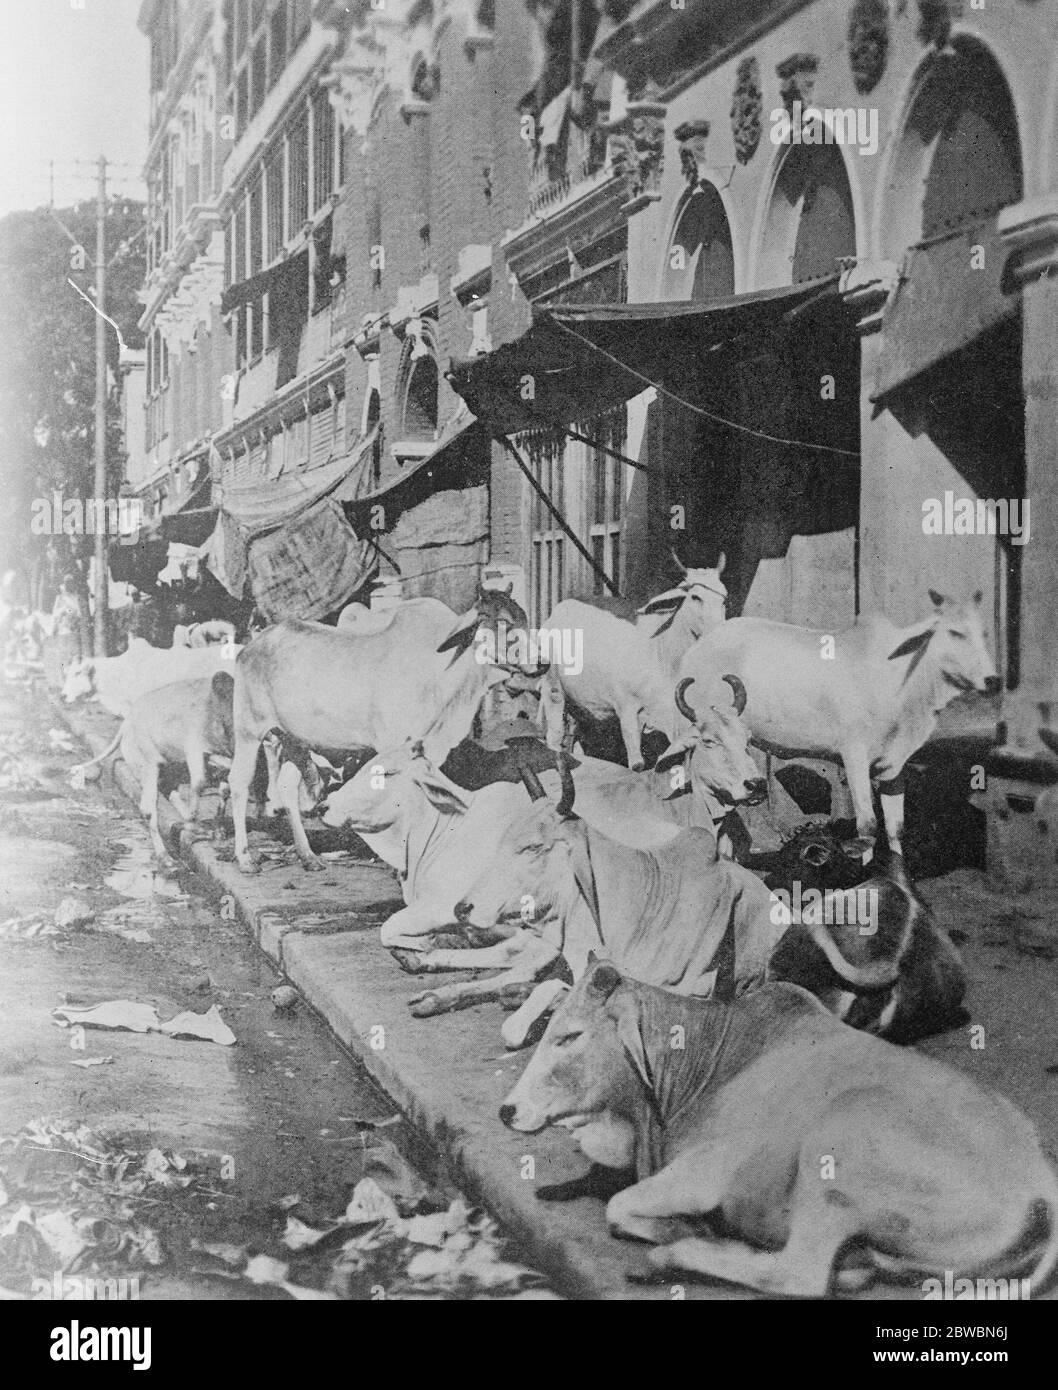 Sacred Cattle Sleep on the Pavements in West Bengal This remarkable phot shows sacred cattle sleeping on the pavement in Calcutta . The beastsare allowed to wonder through the shopsand bazaars , the police and Goverment being forced to defer to Hindu relgious feeling in the matter  20 May 1922 Stock Photo